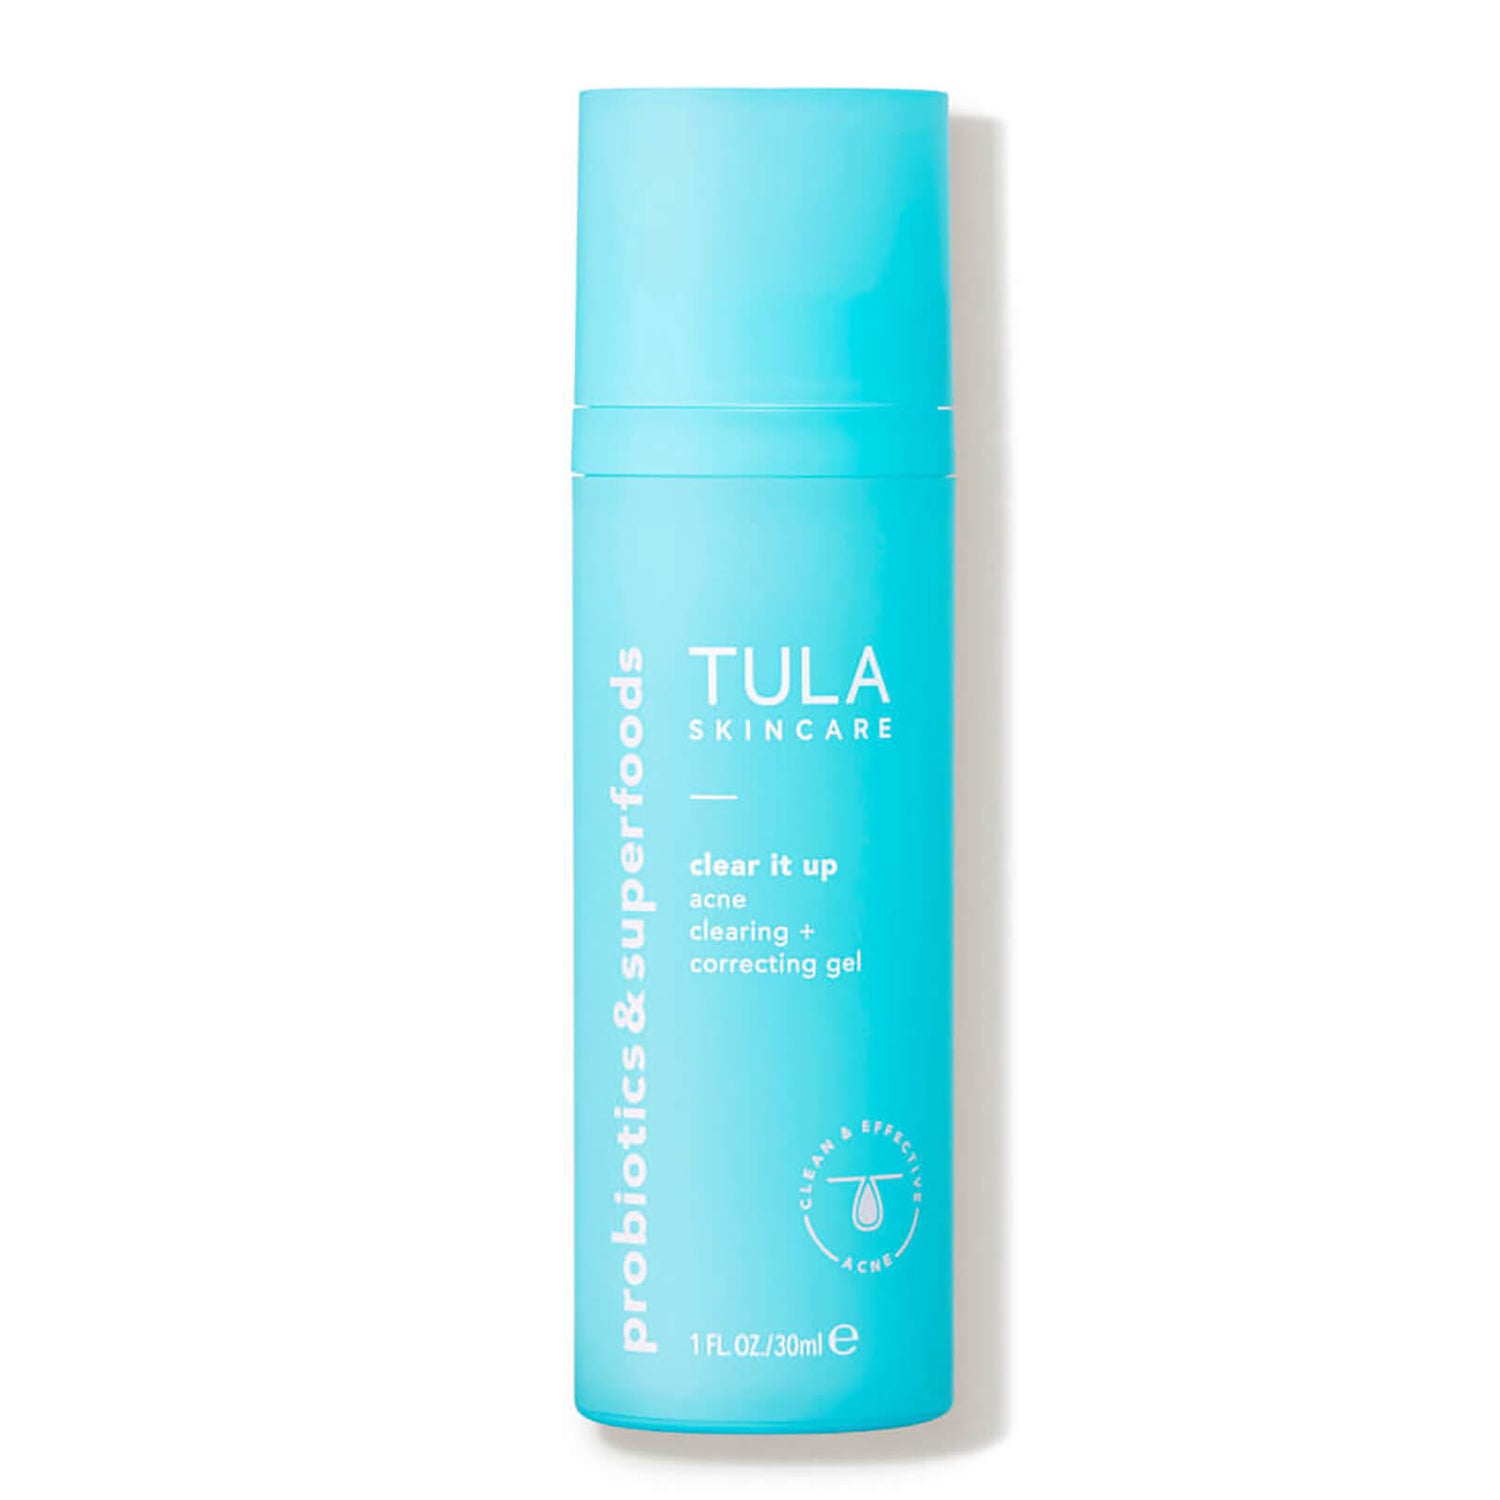 TULA Skincare Clear It Up Acne Clearing + Tone Correcting Gel (1 fl. oz.)